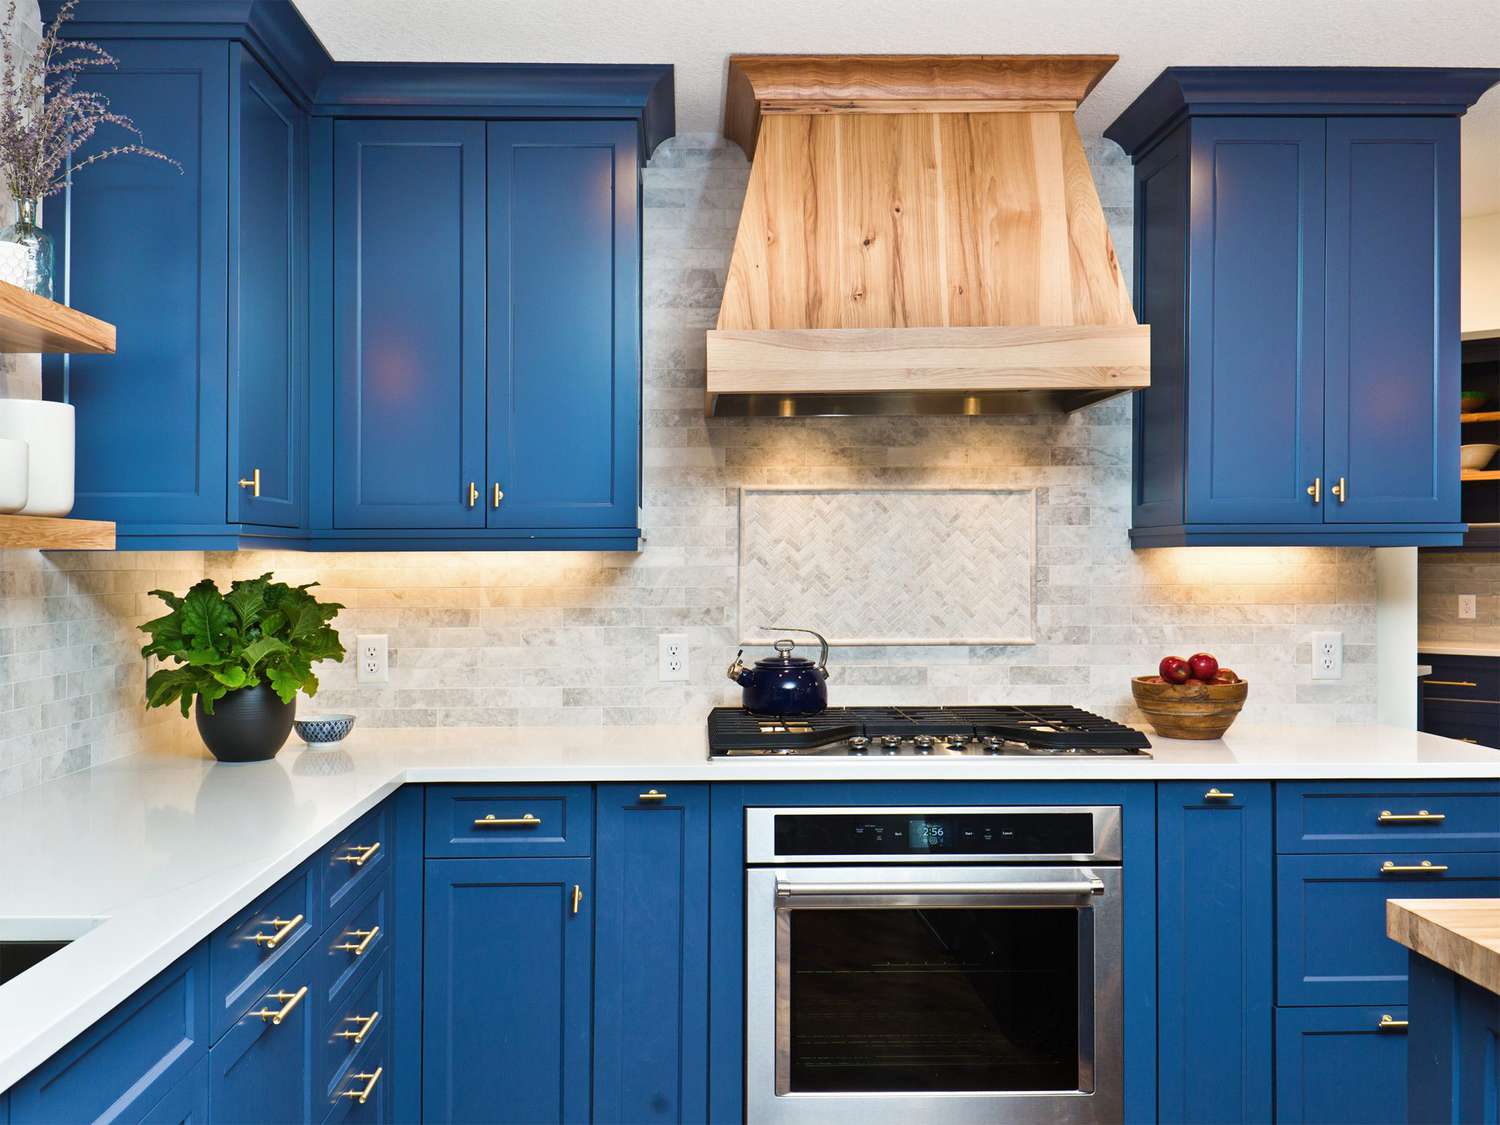 Best Tips for Painting Kitchen Cabinets